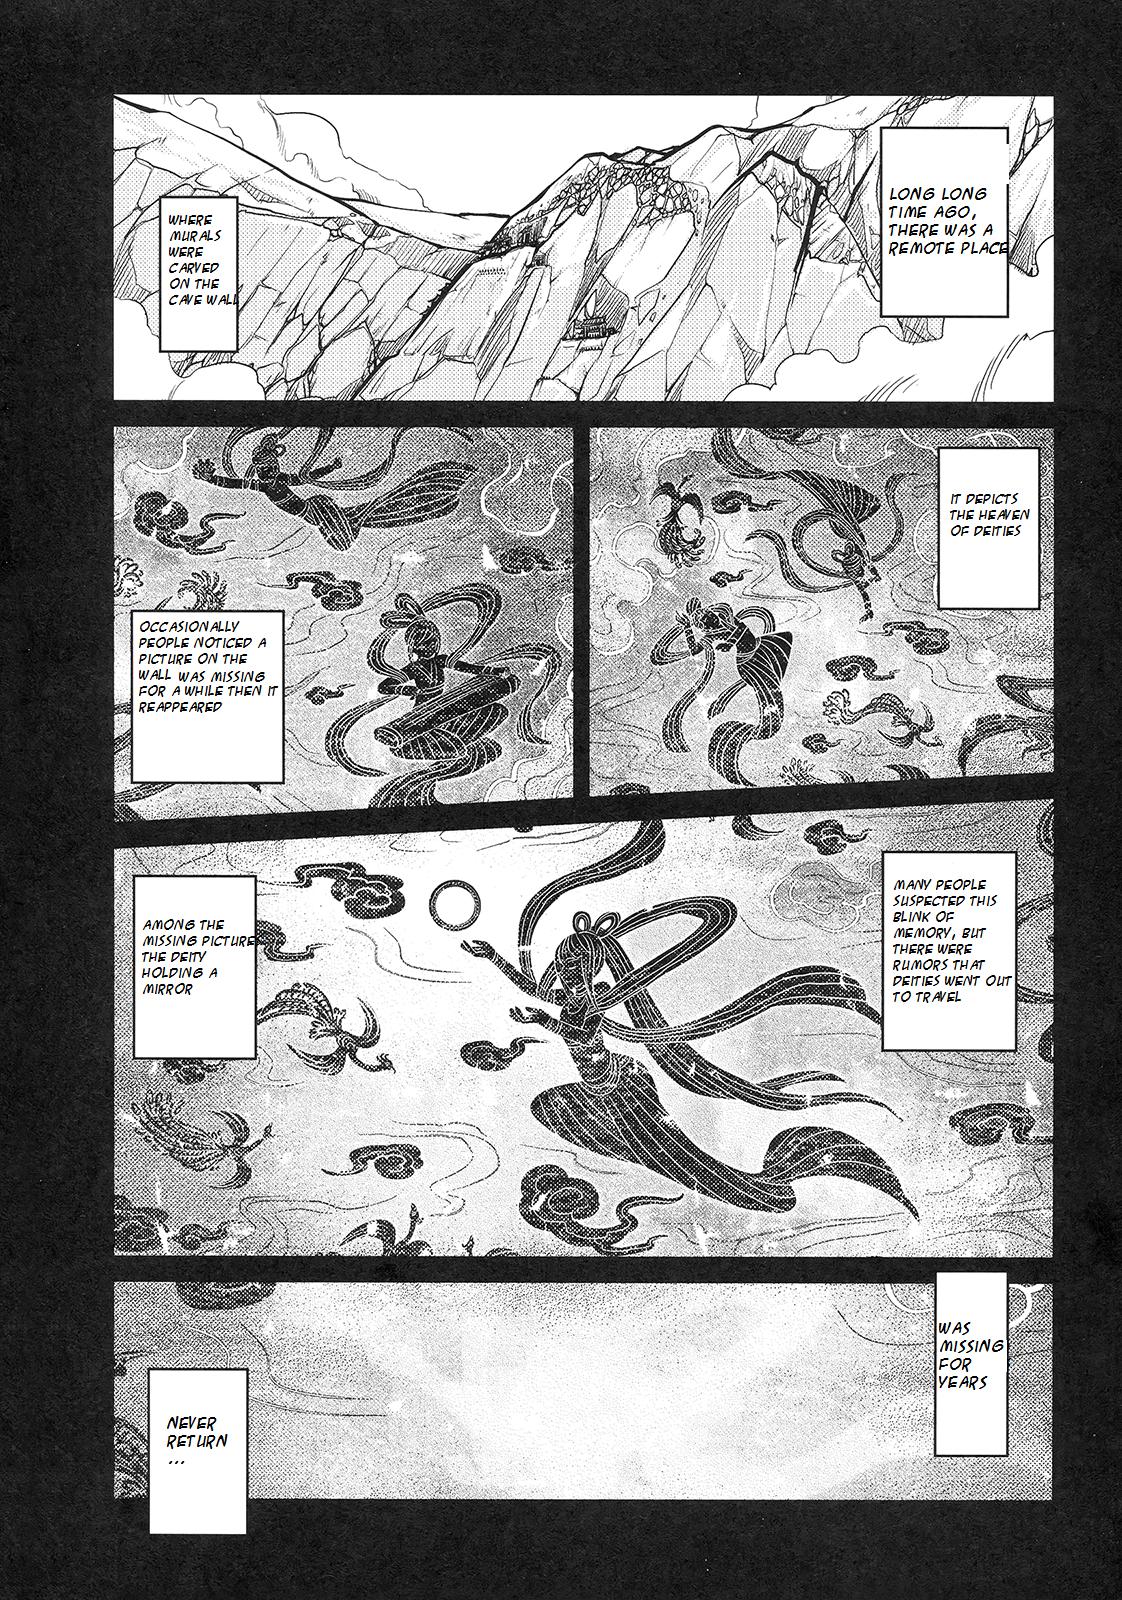 Camwhore Tale of the Mirror Pale - Page 4